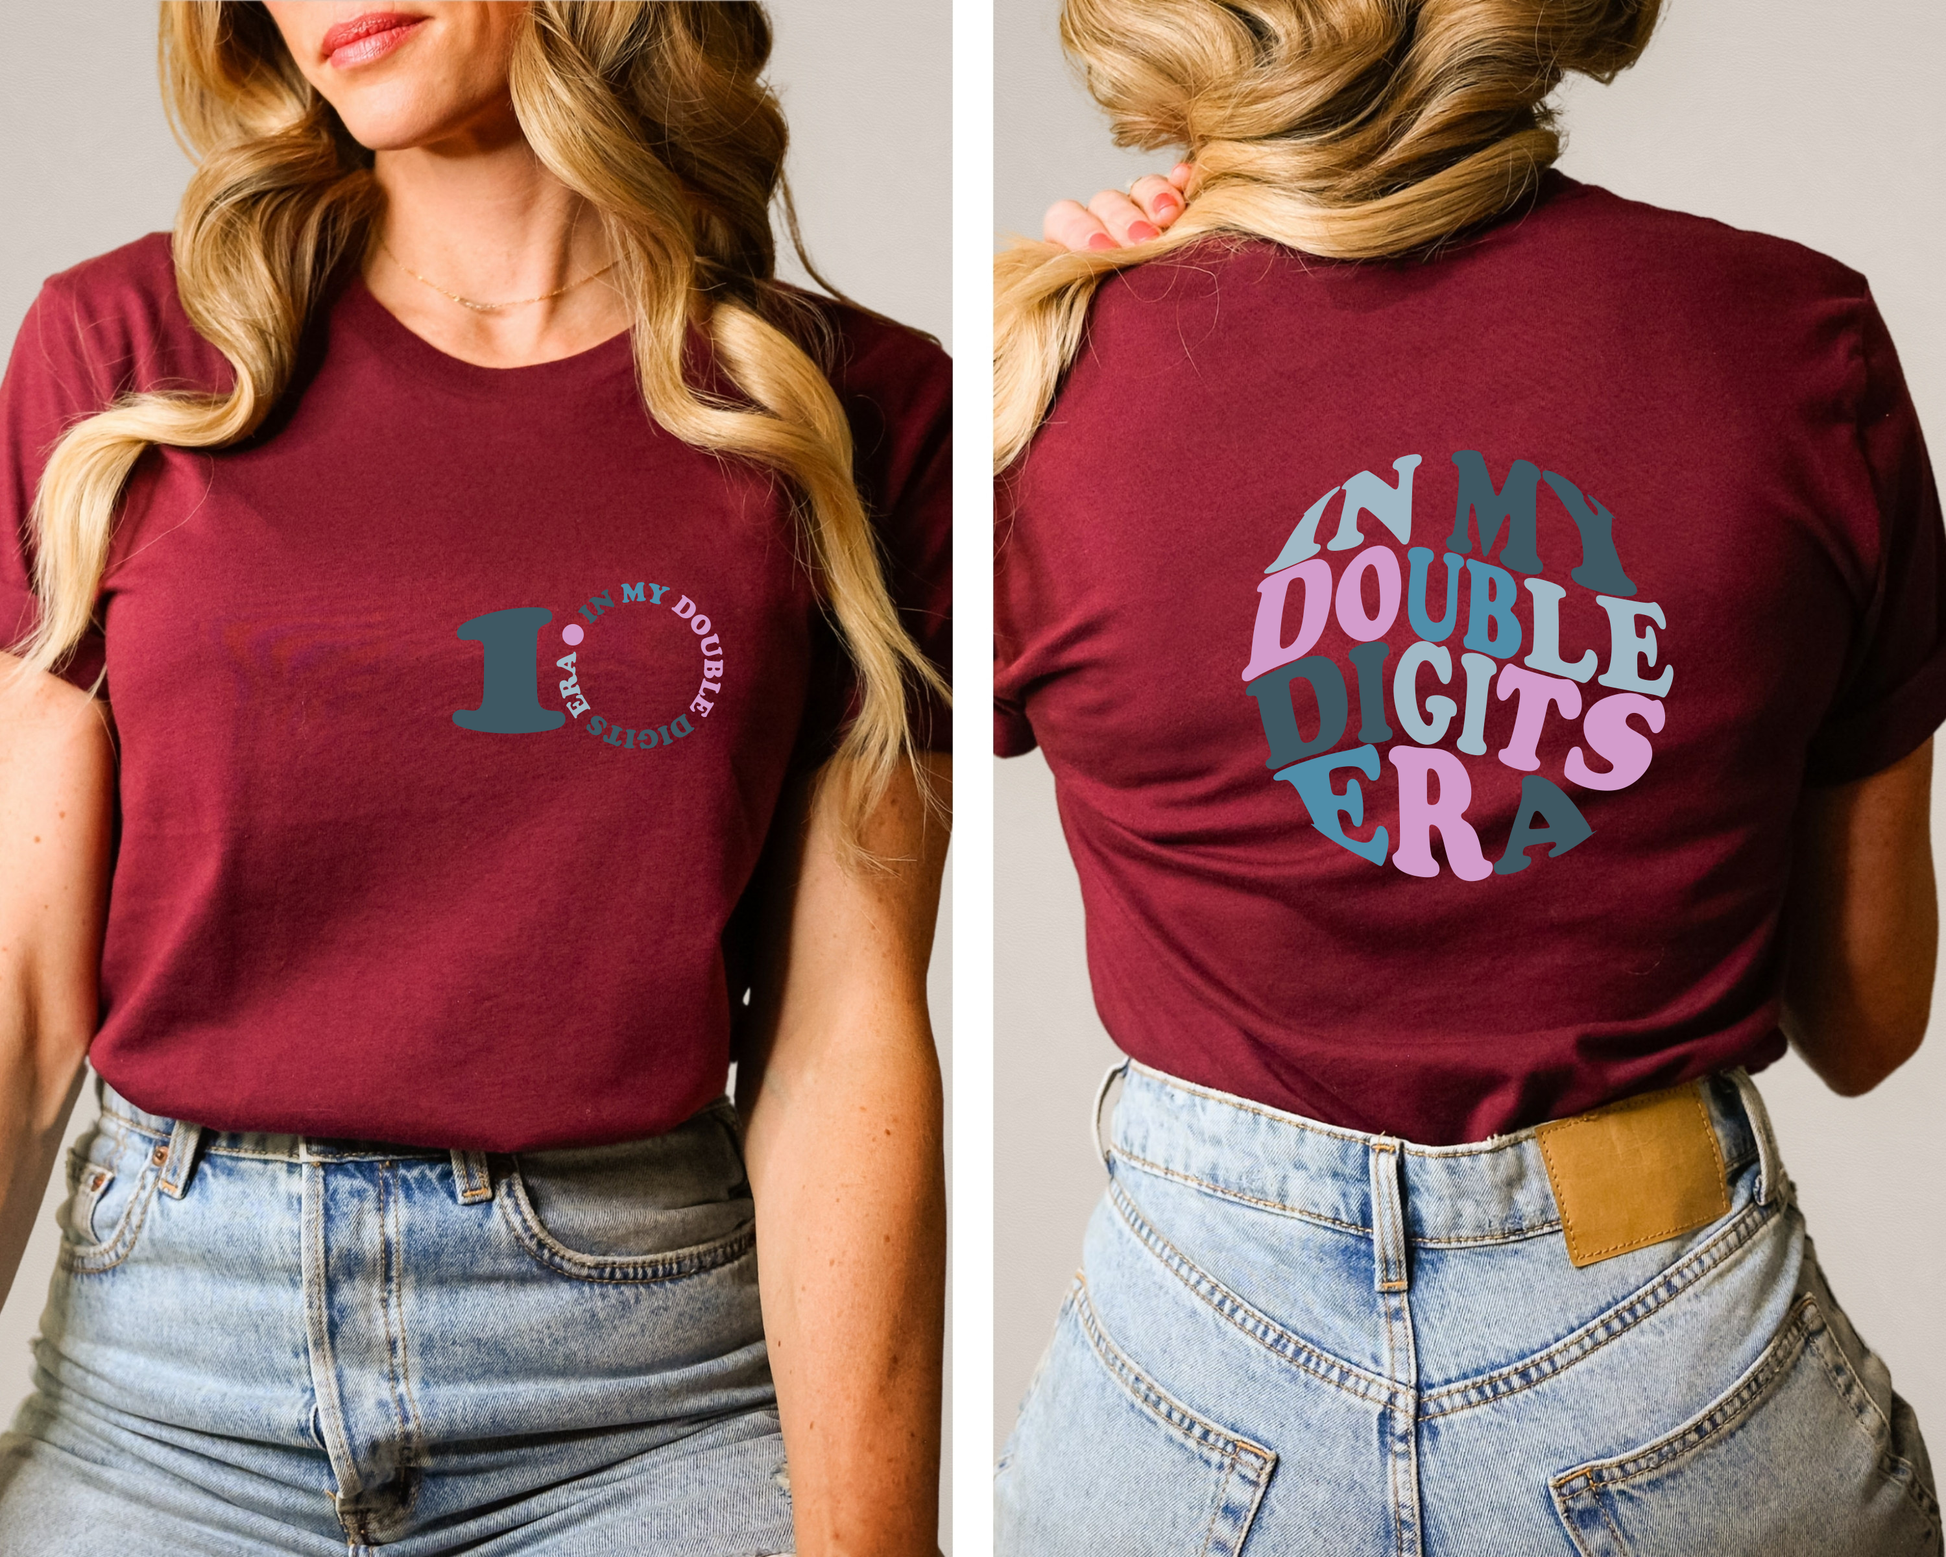 Mark your special milestone with this unique and eye-catching "In My Double Digits" shirt